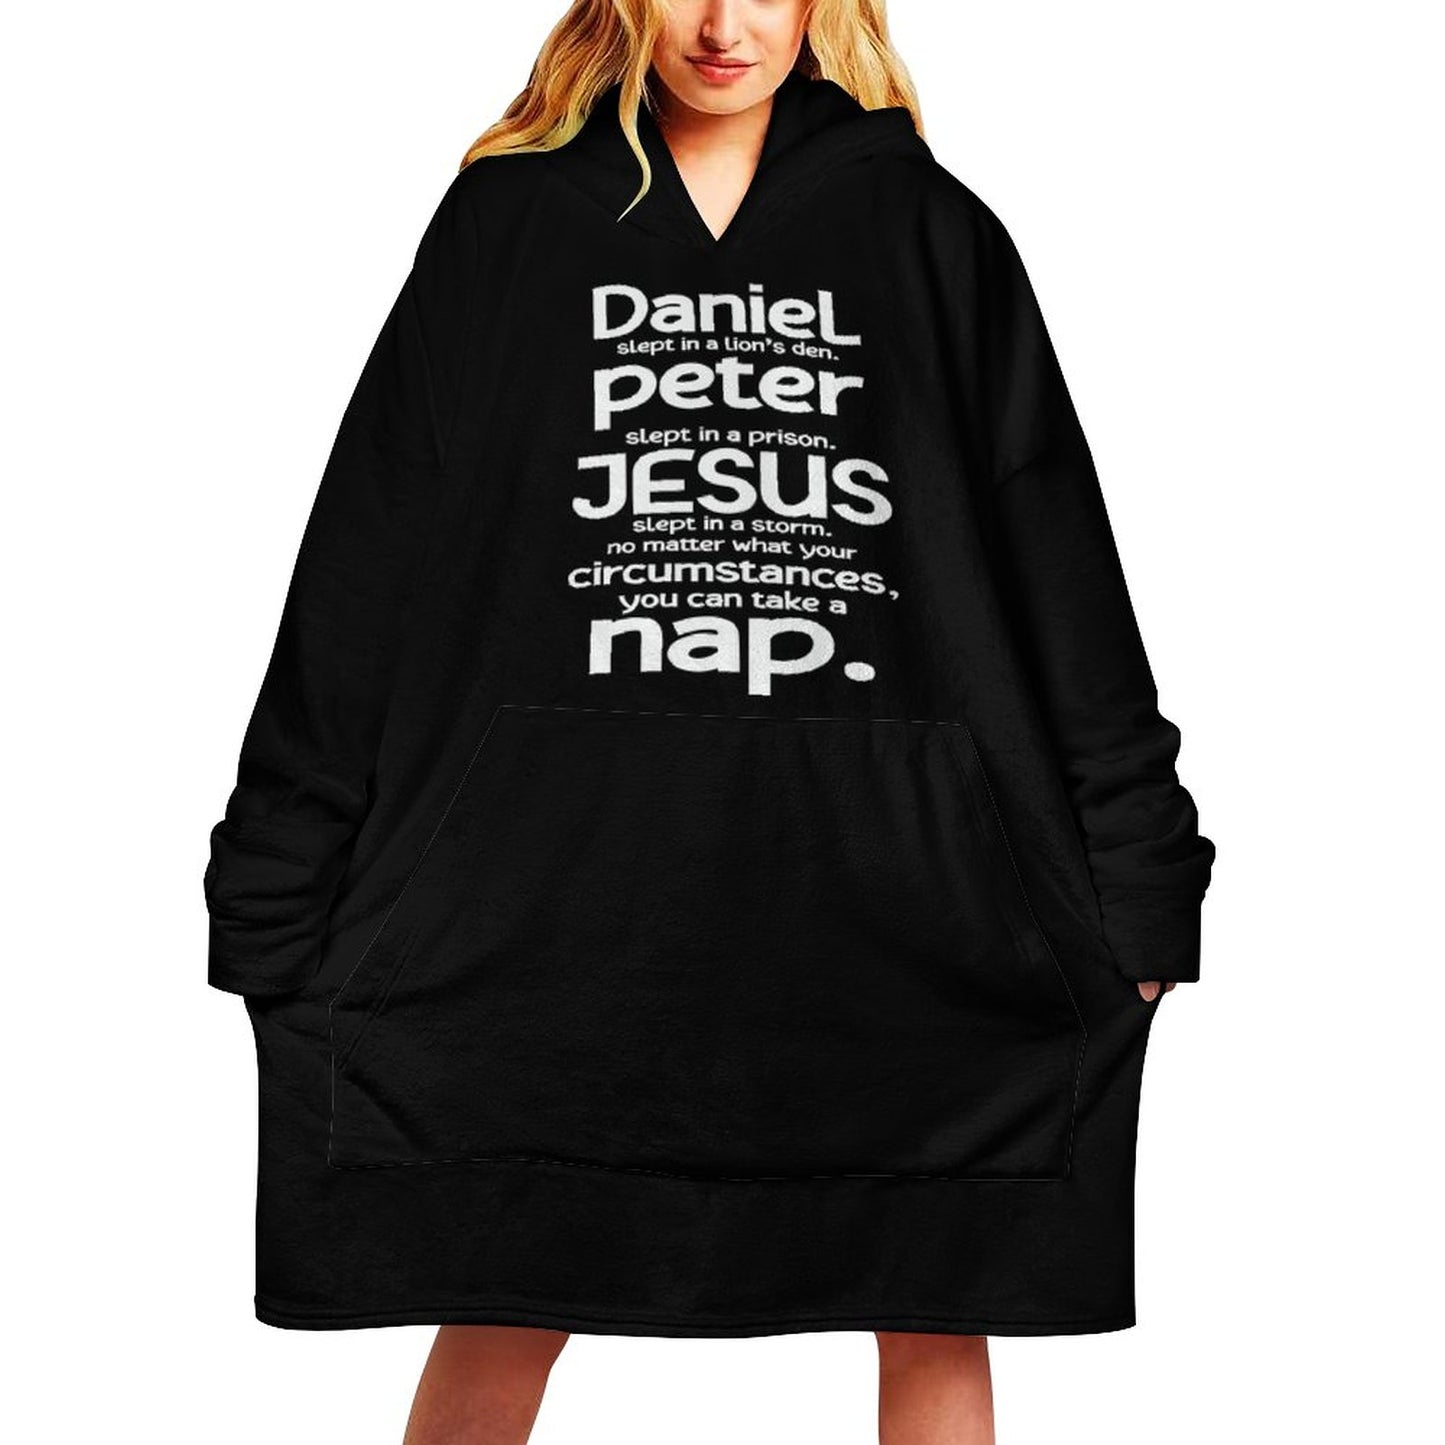 You Can Take A Nap Funny Christian Wearable Oversized Sweater Blanket